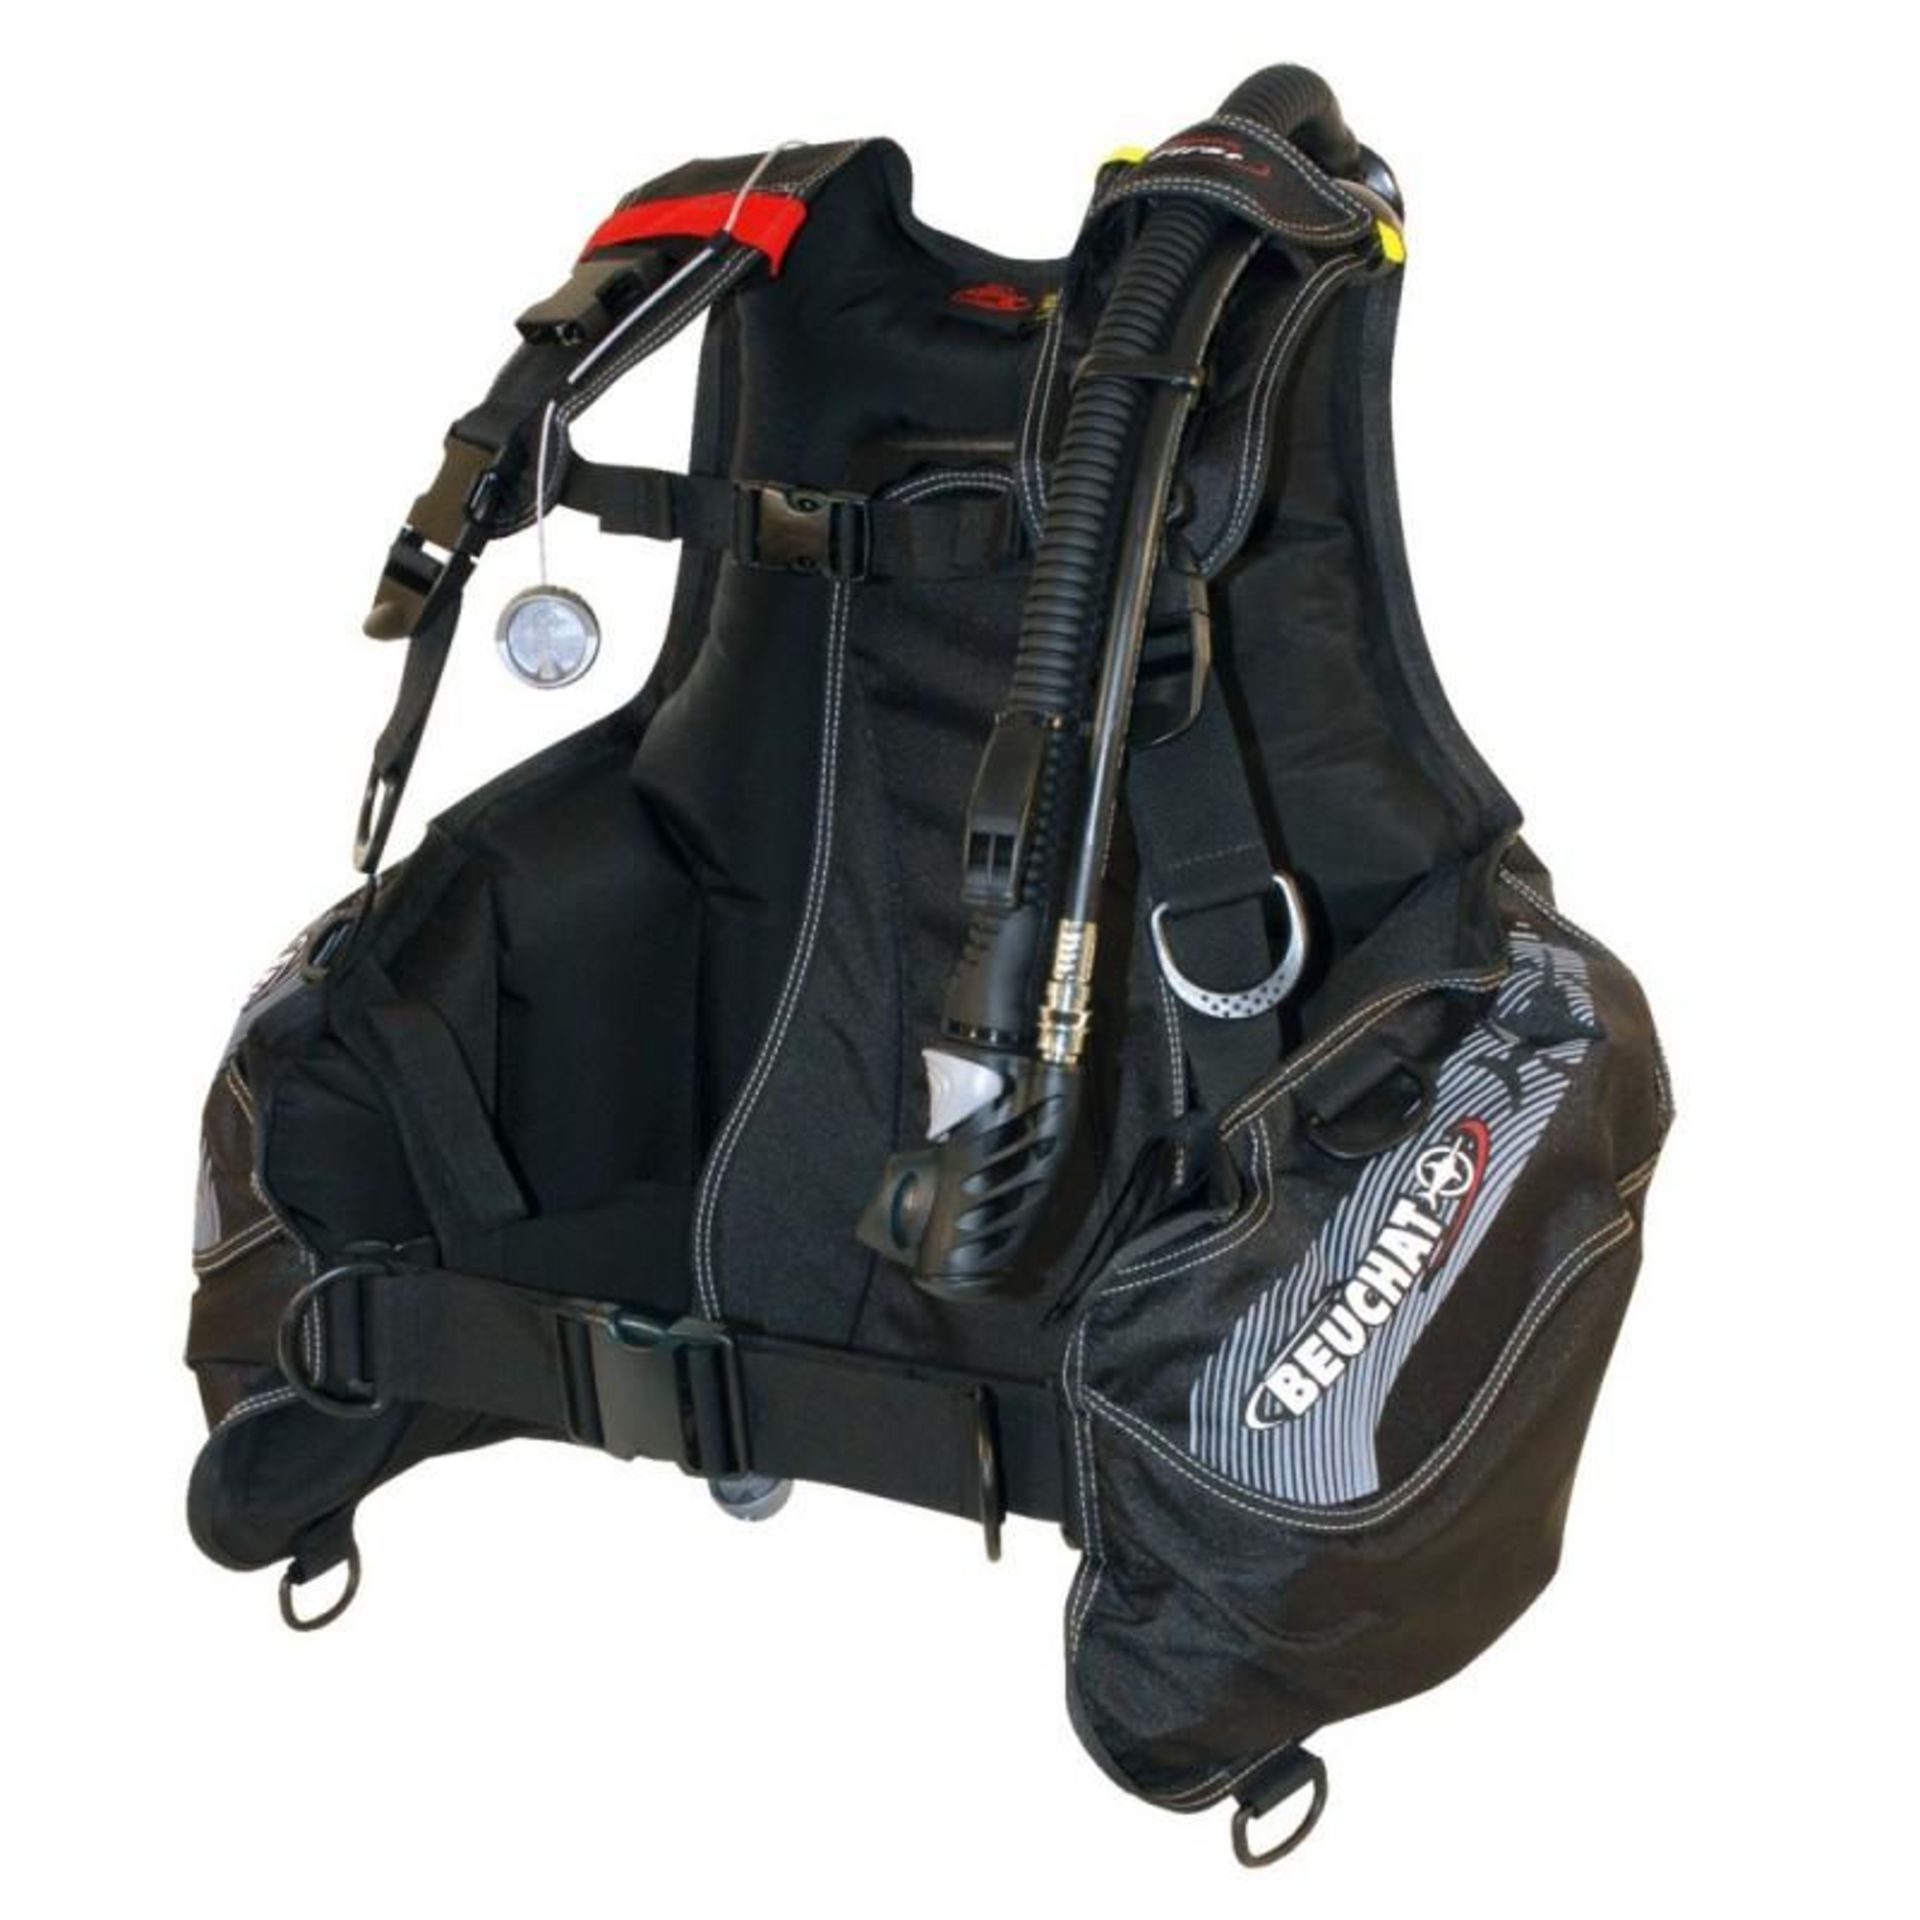 1 x Beuchat MasterLift First Bag - Ref: NS478 - CL349 - Altrincham WA14 - Total RRP £245.34